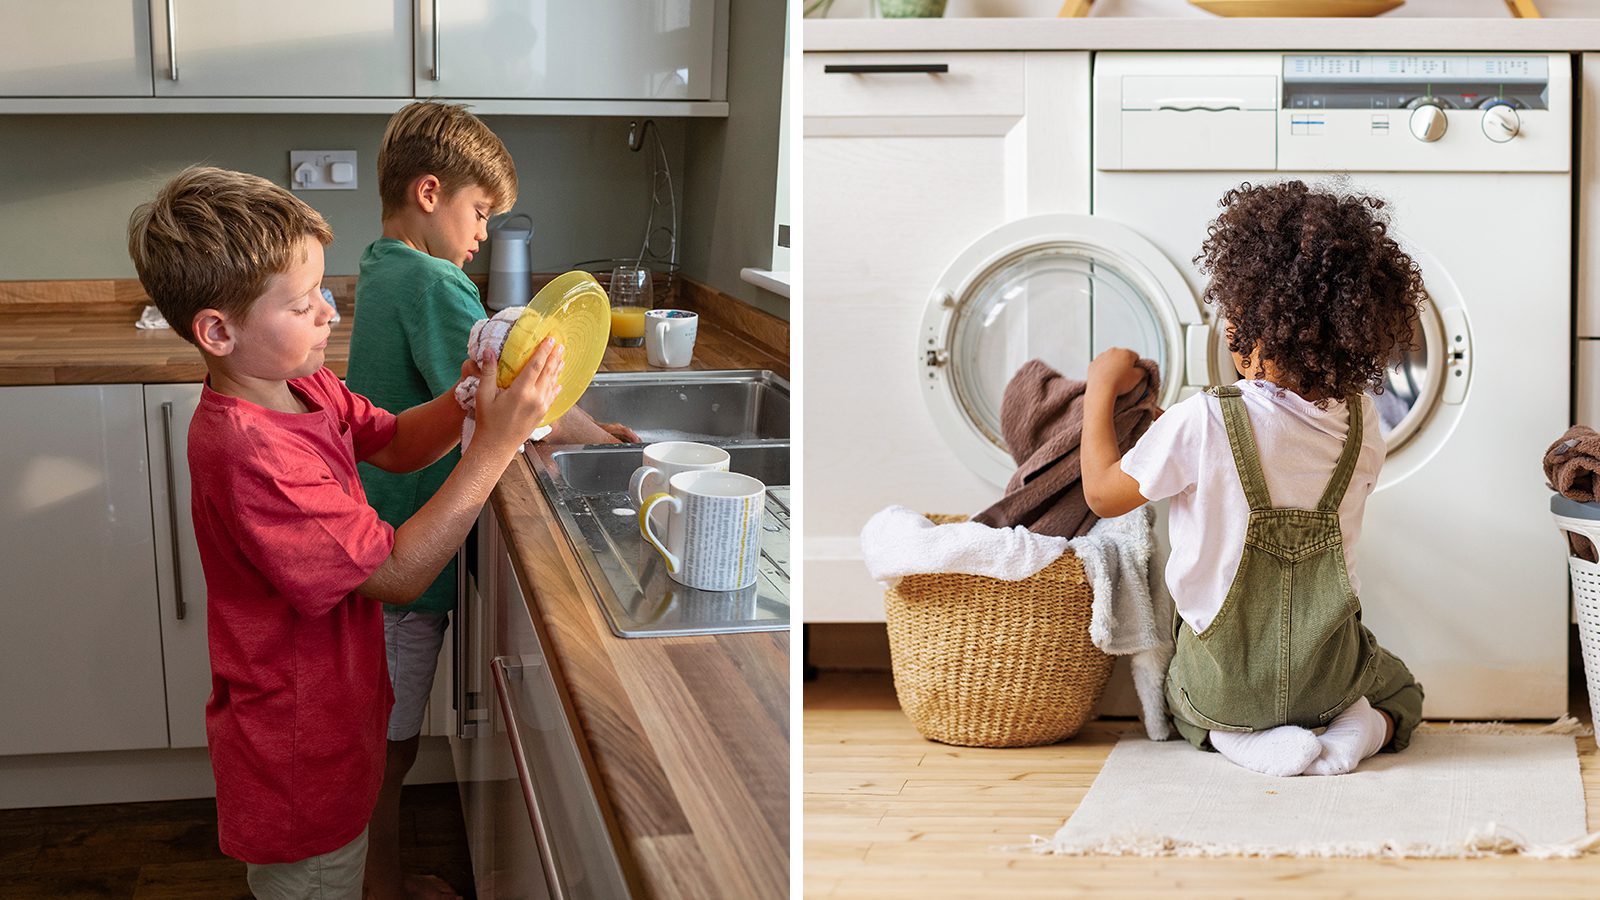 8 Reasons Why Parents Should Let Kids Be Self-Sufficient